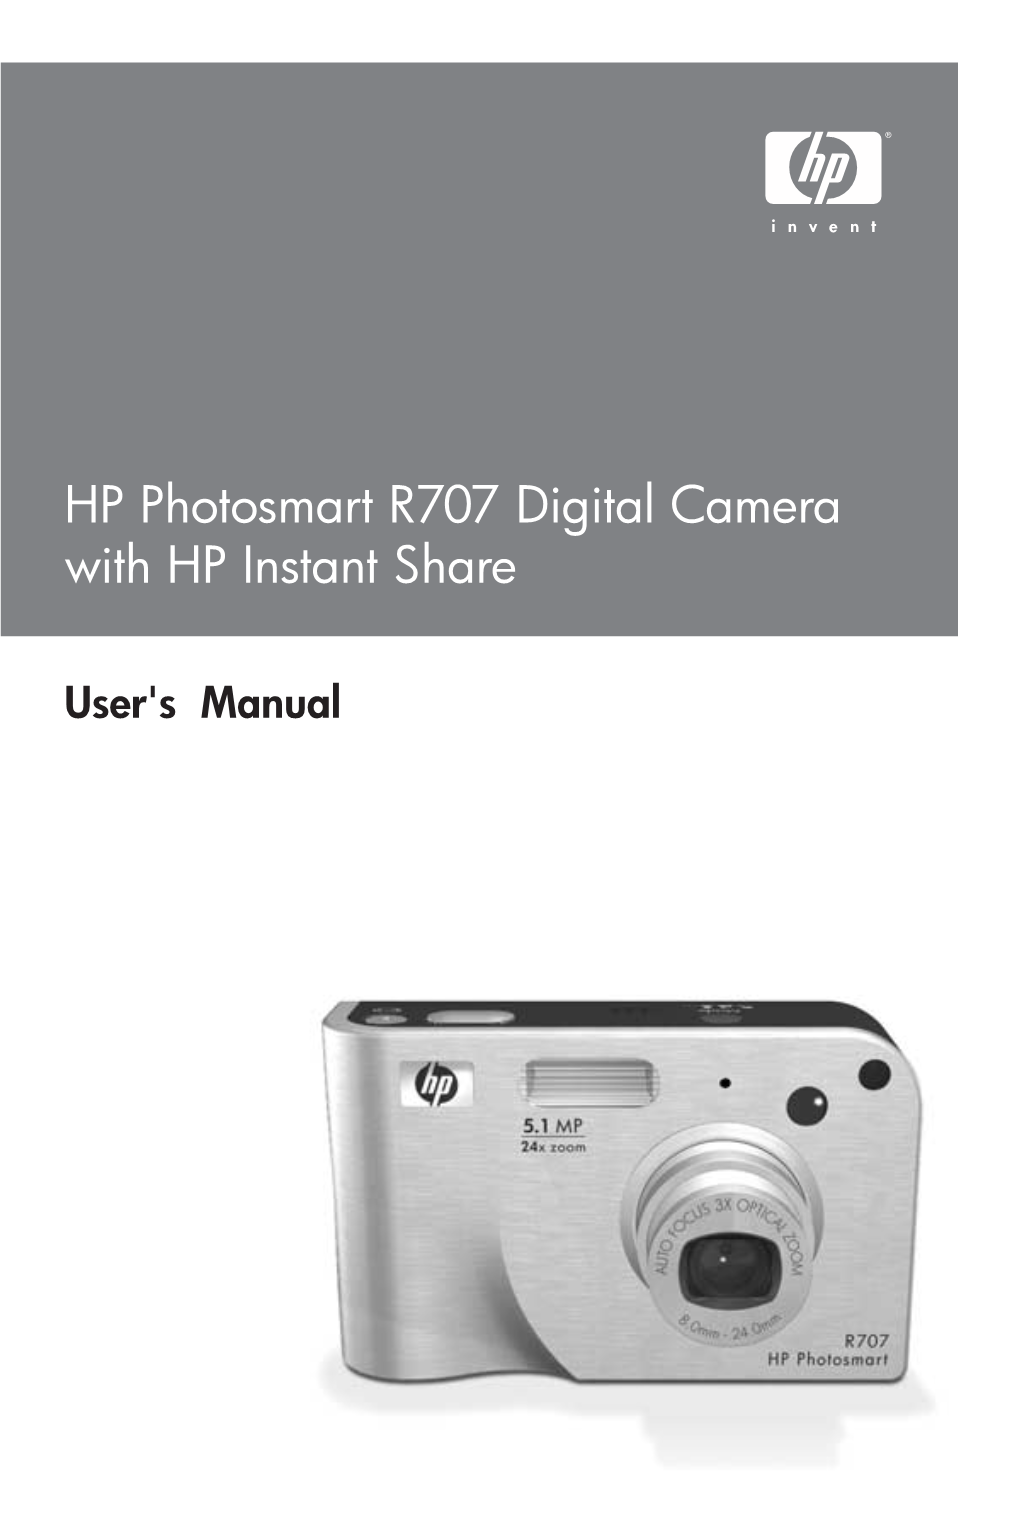 HP Photosmart R707 Digital Camera with HP Instant Share